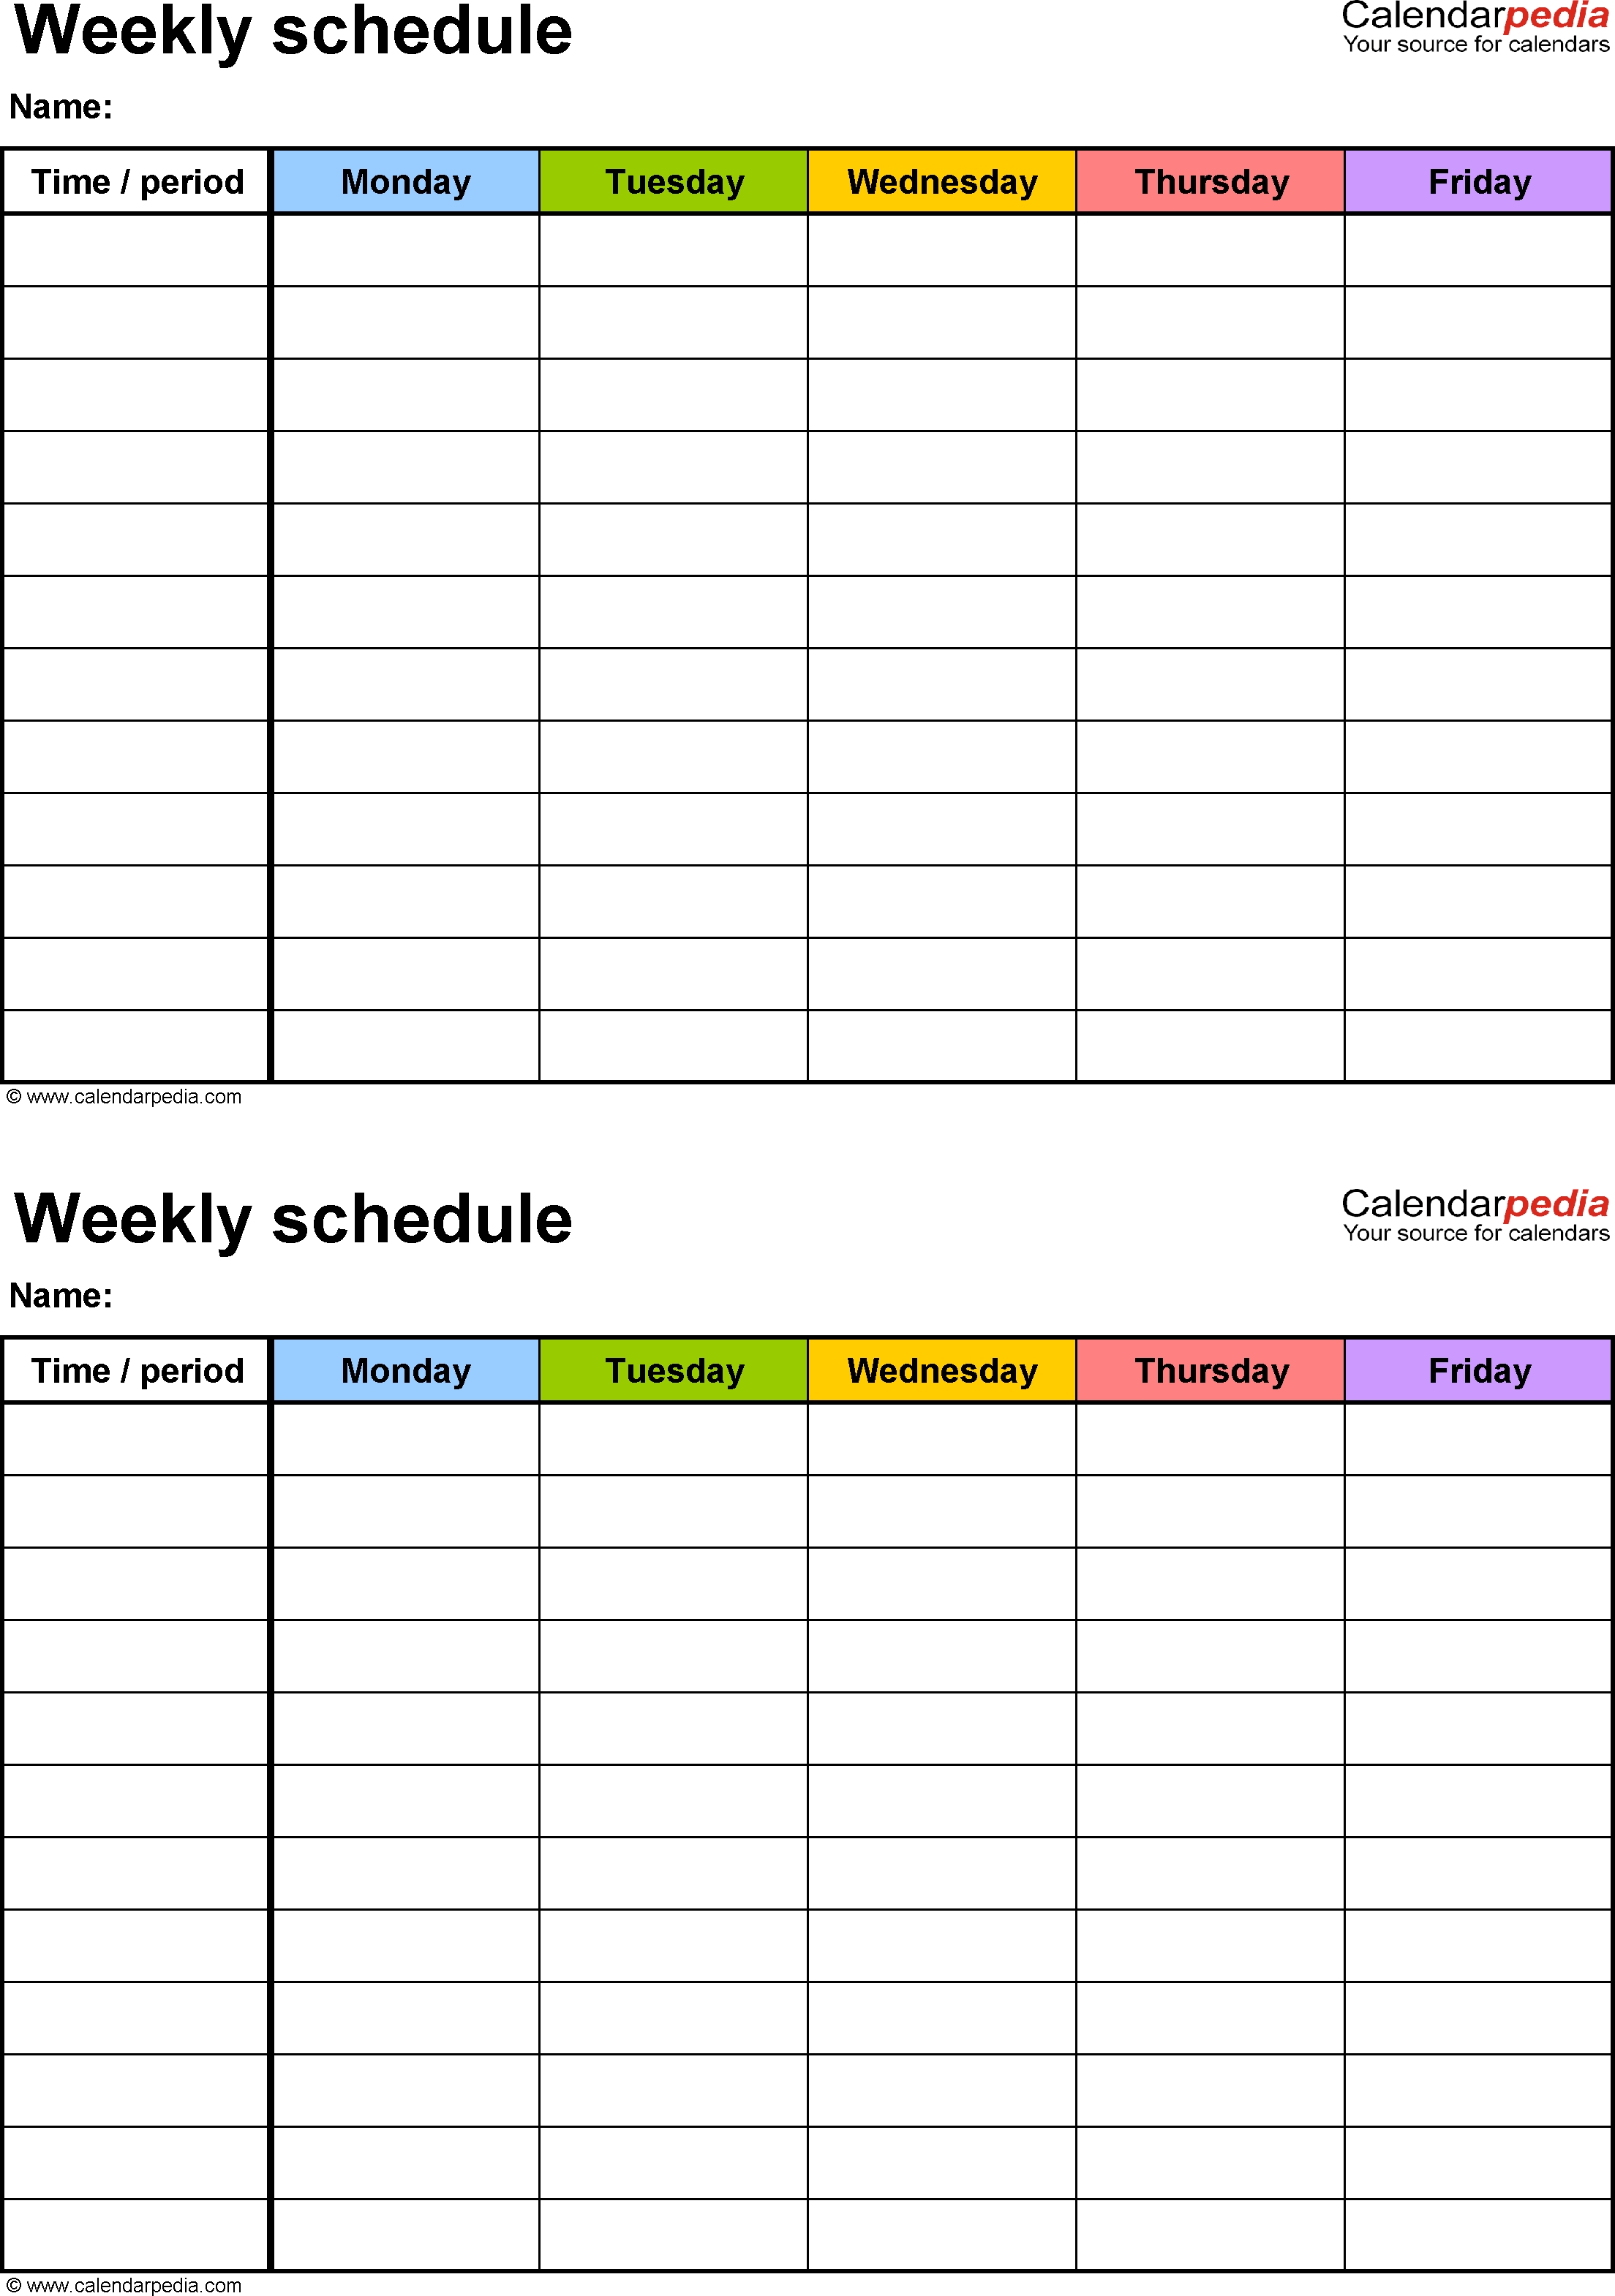 Free Weekly Schedule Templates For Pdf - 18 Templates 6 Day Calendar Template